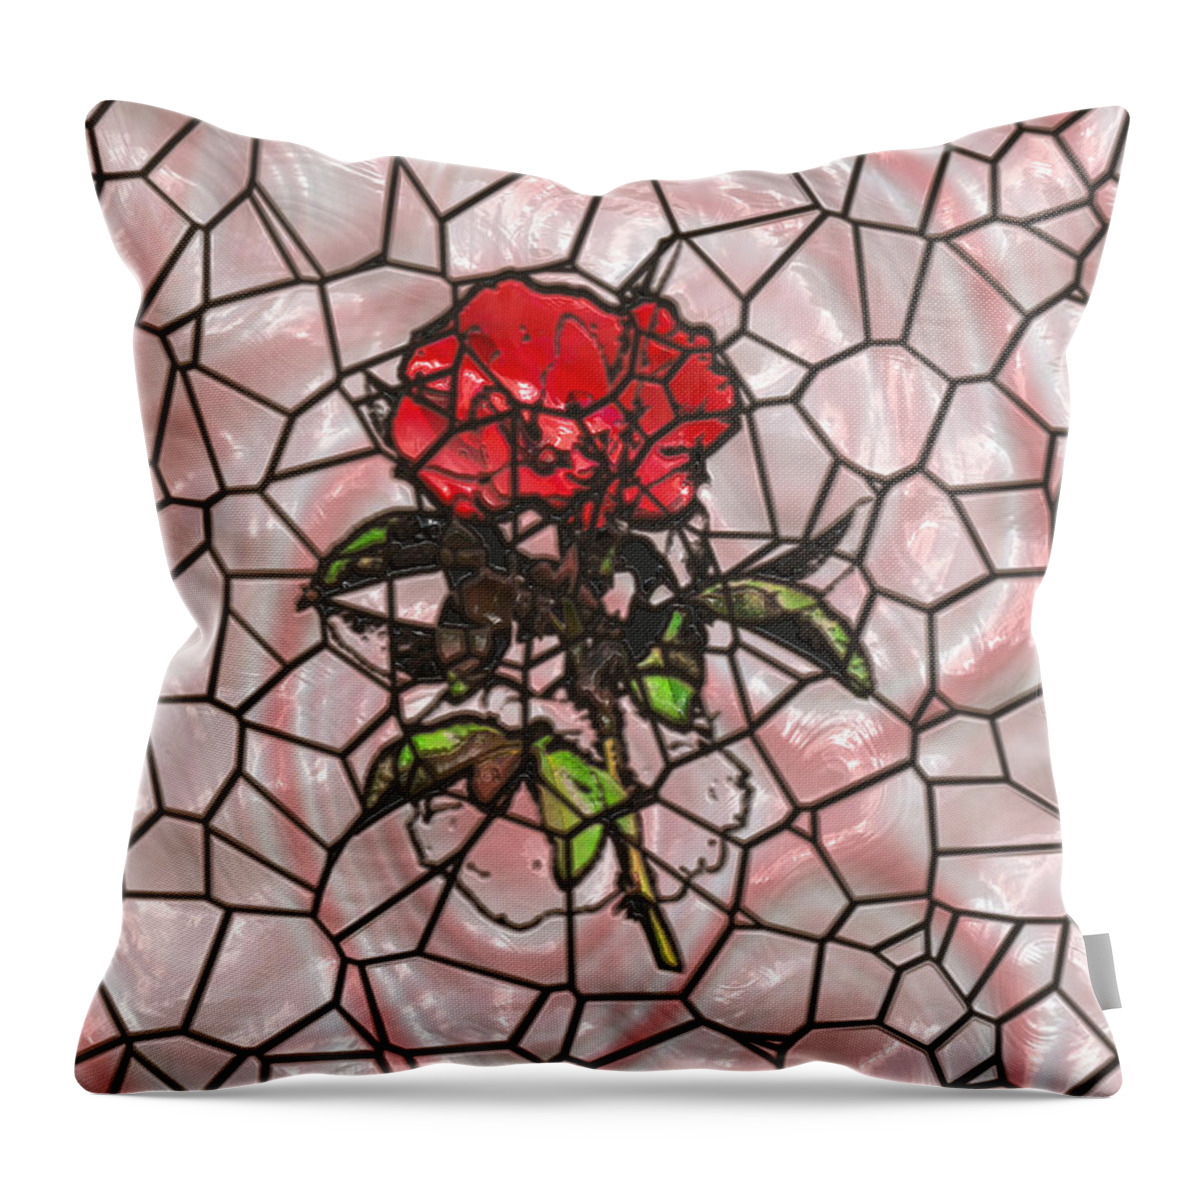 Flower Throw Pillow featuring the photograph A Rose on Stained Glass by John M Bailey